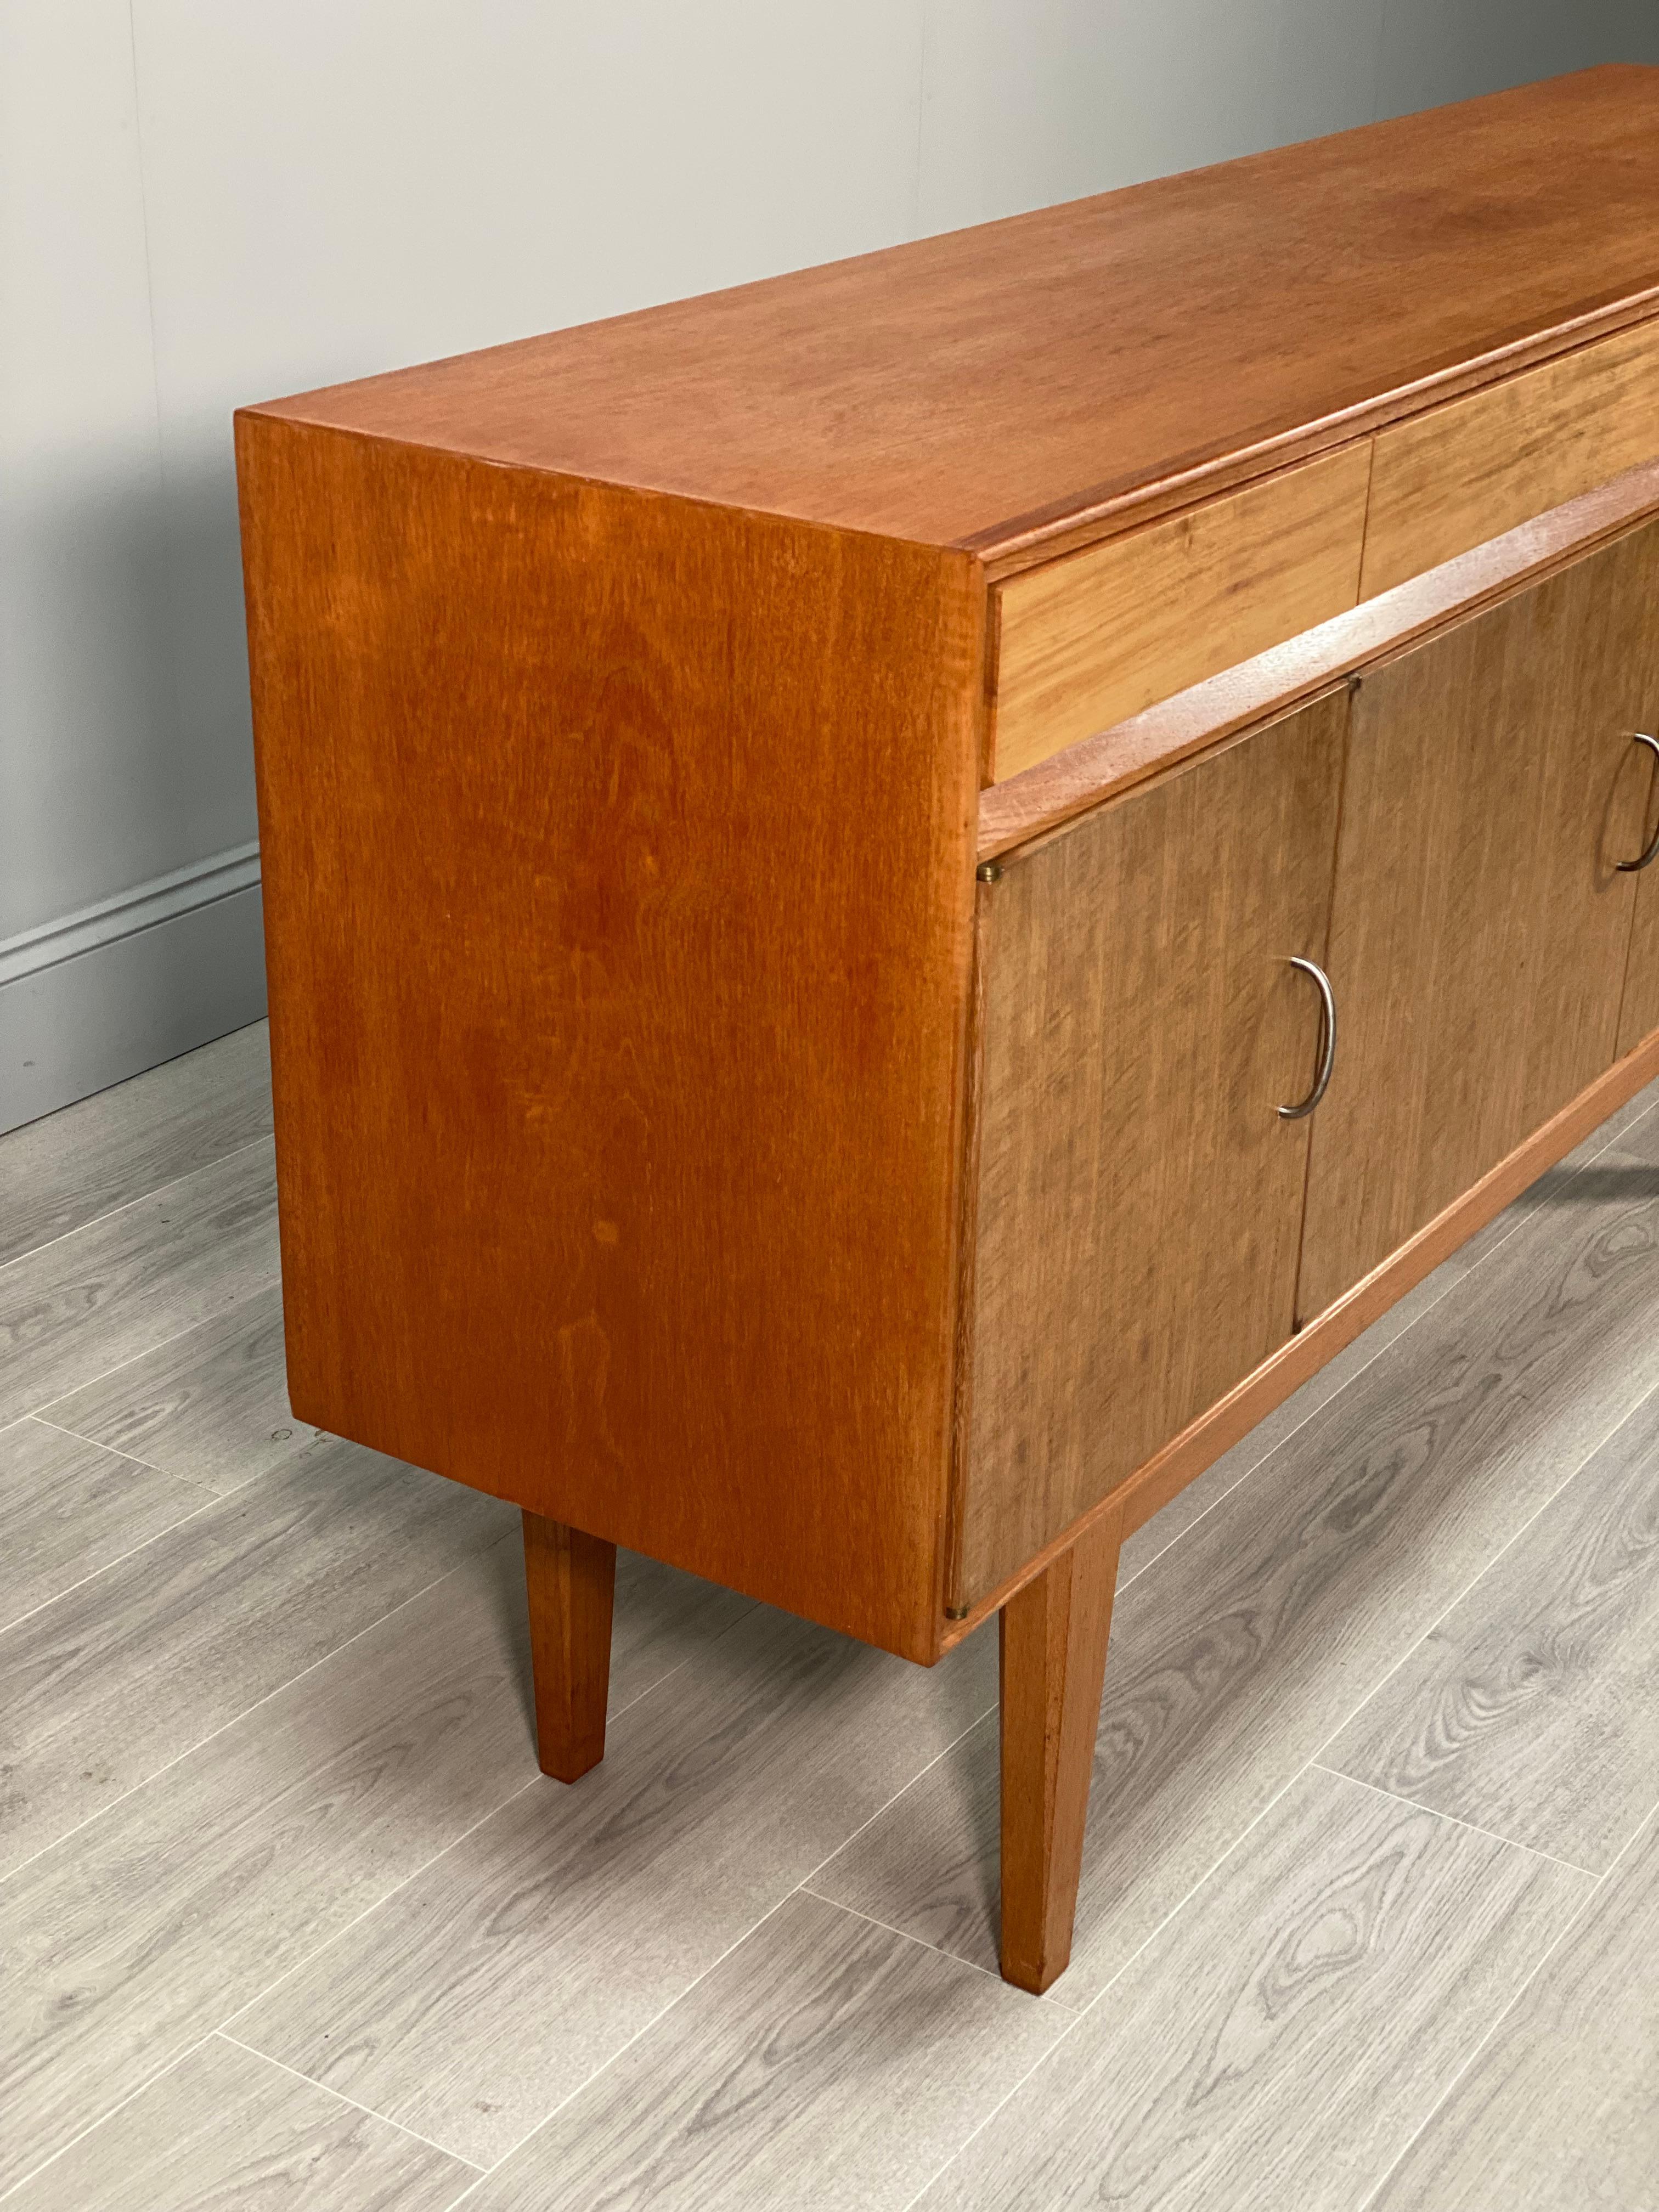 Mid-20th Century Rare Gordon Russell Sideboard By WH Curly Russell c.1958 For Sale